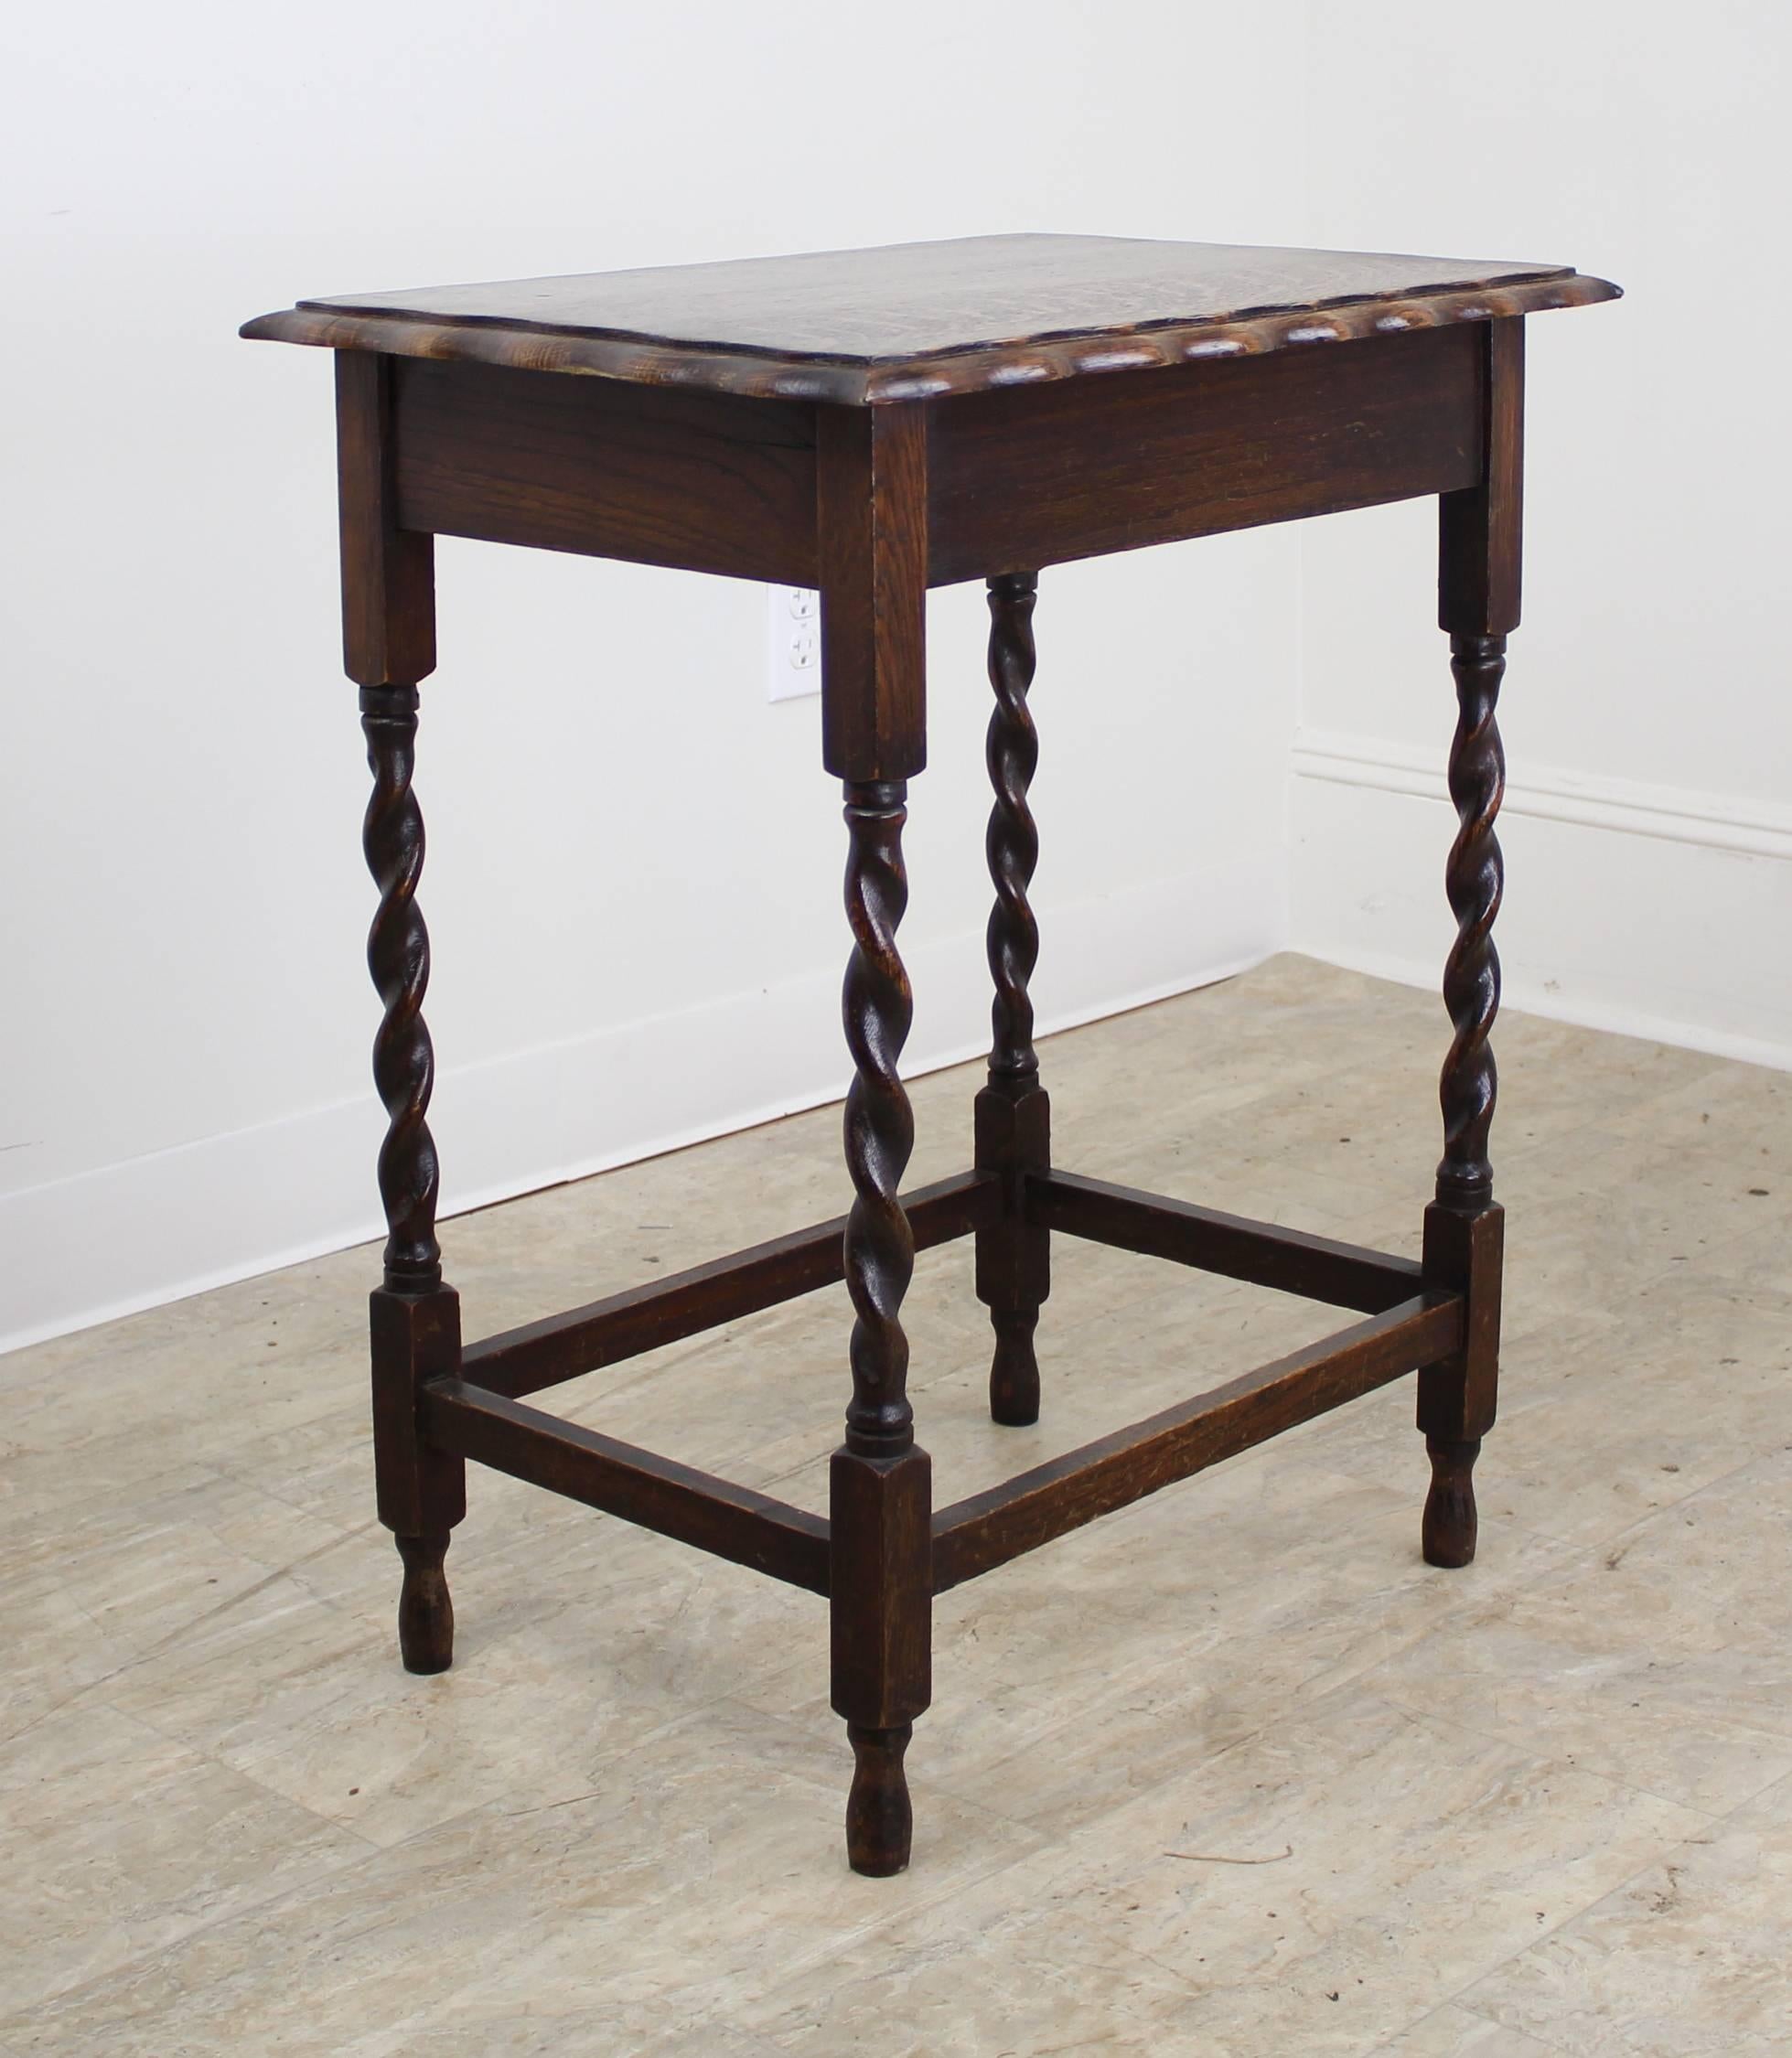 A charming simple occasional table in dark oak with eye-catching barley twists detail. Would make a nice lamp table and would pair nicely on either side of a sofa or guest bed with our other barley twist side table.